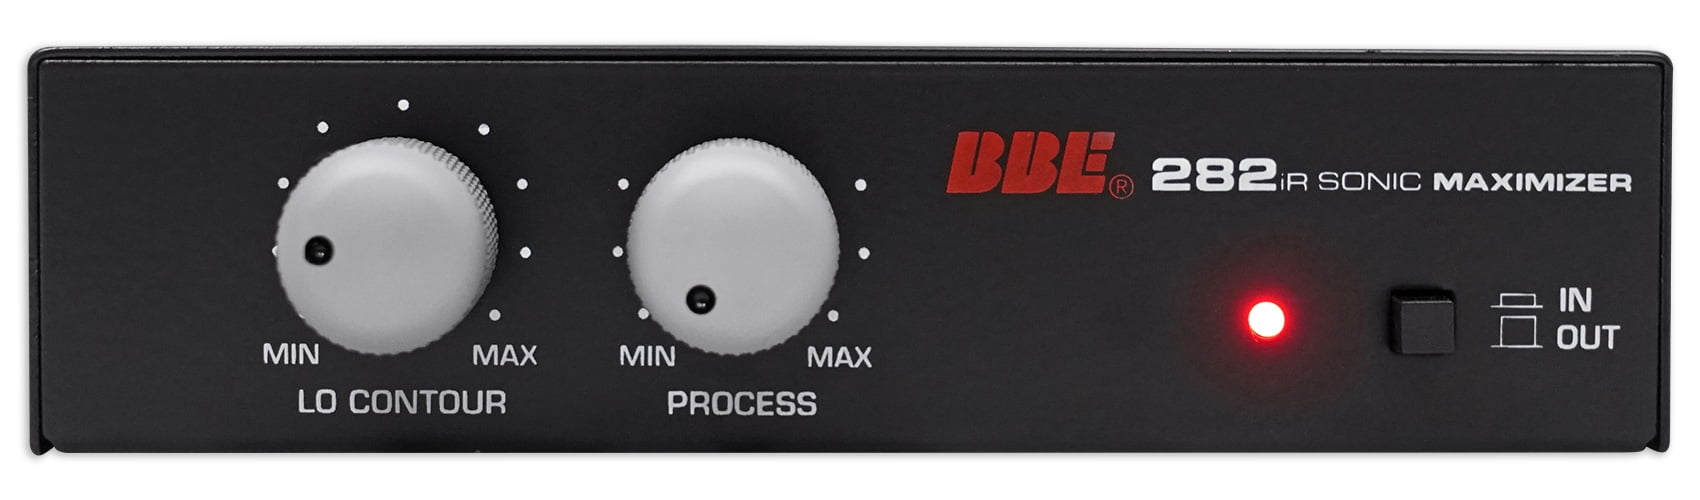 BBE 282iR Desktop Sonic Maximizer with Unbalanced RCA and 3.5mm Connections 